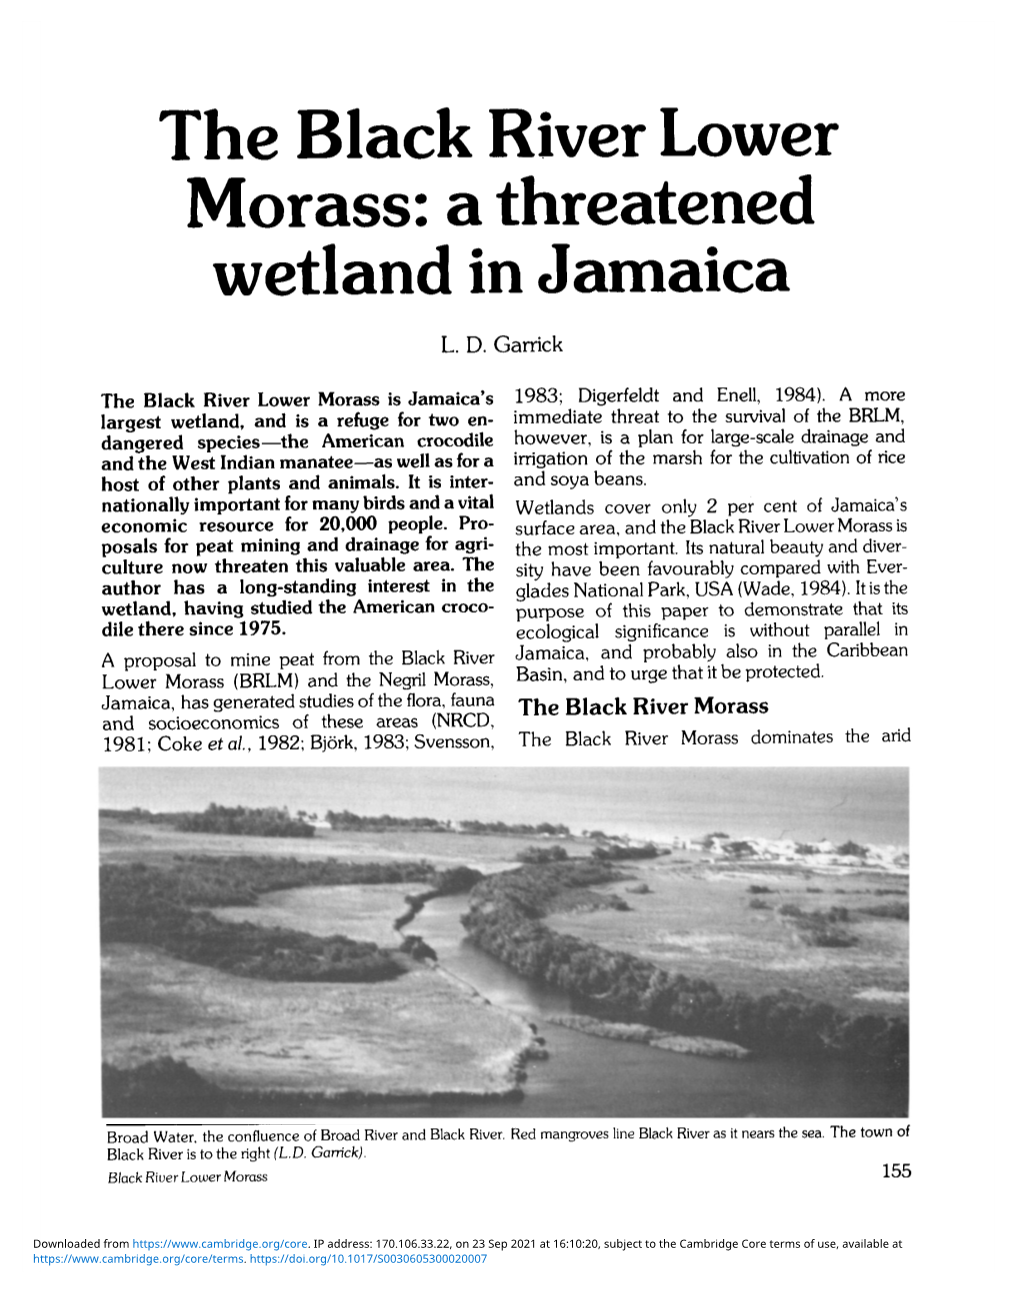 The Black River Lower Morass: a Threatened Wetland in Jamaica